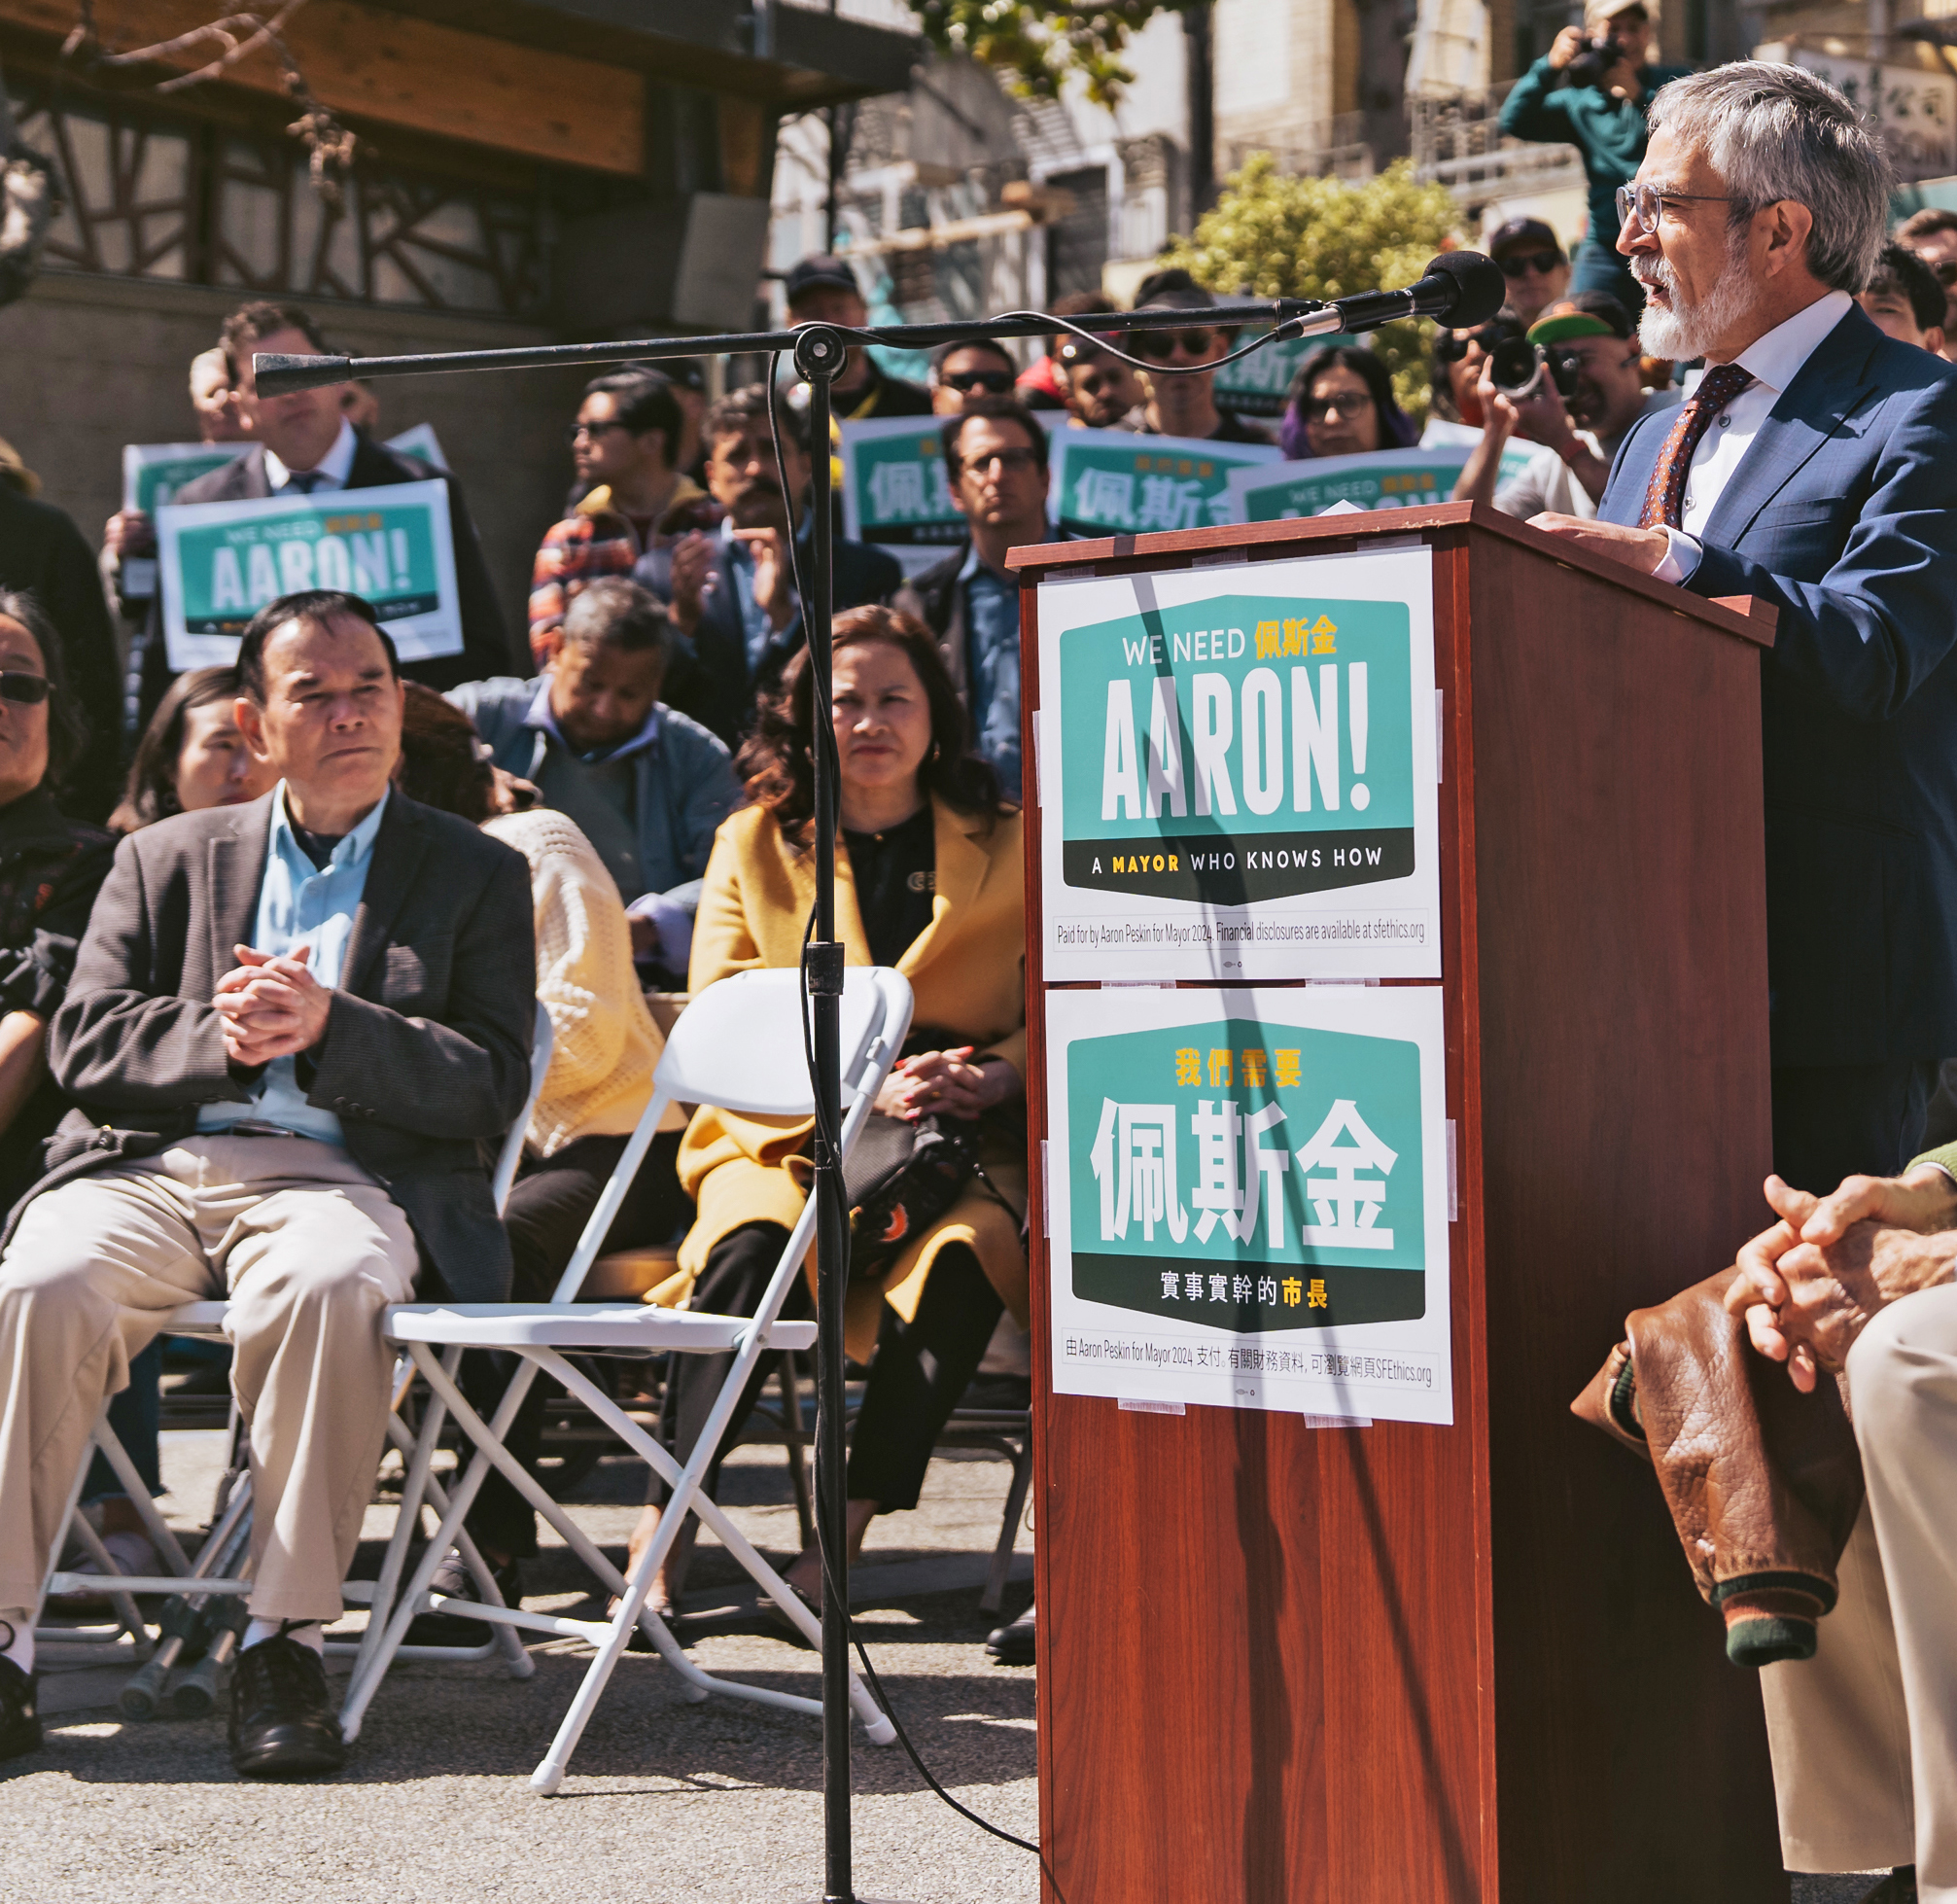 A man speaks at a podium with a &quot;We Need Aaron!&quot; sign, to an attentive audience holding similar signs at an outdoor mayoral campaign event.